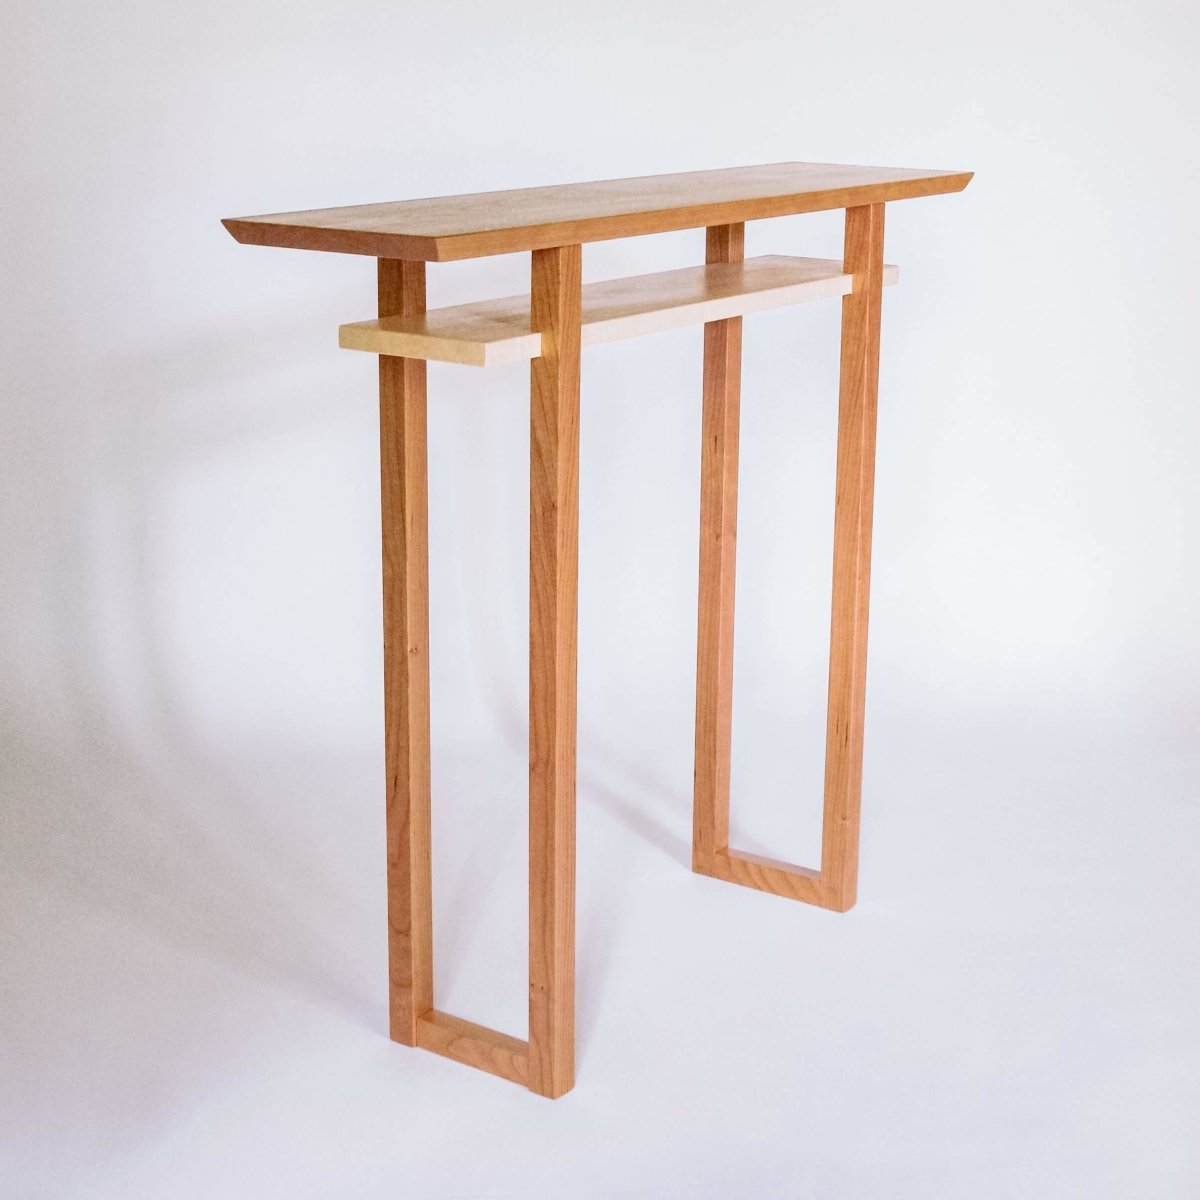 a small modern hall table handmade from cherry and tiger maple wood furniture designed by Mokuzai Furniture